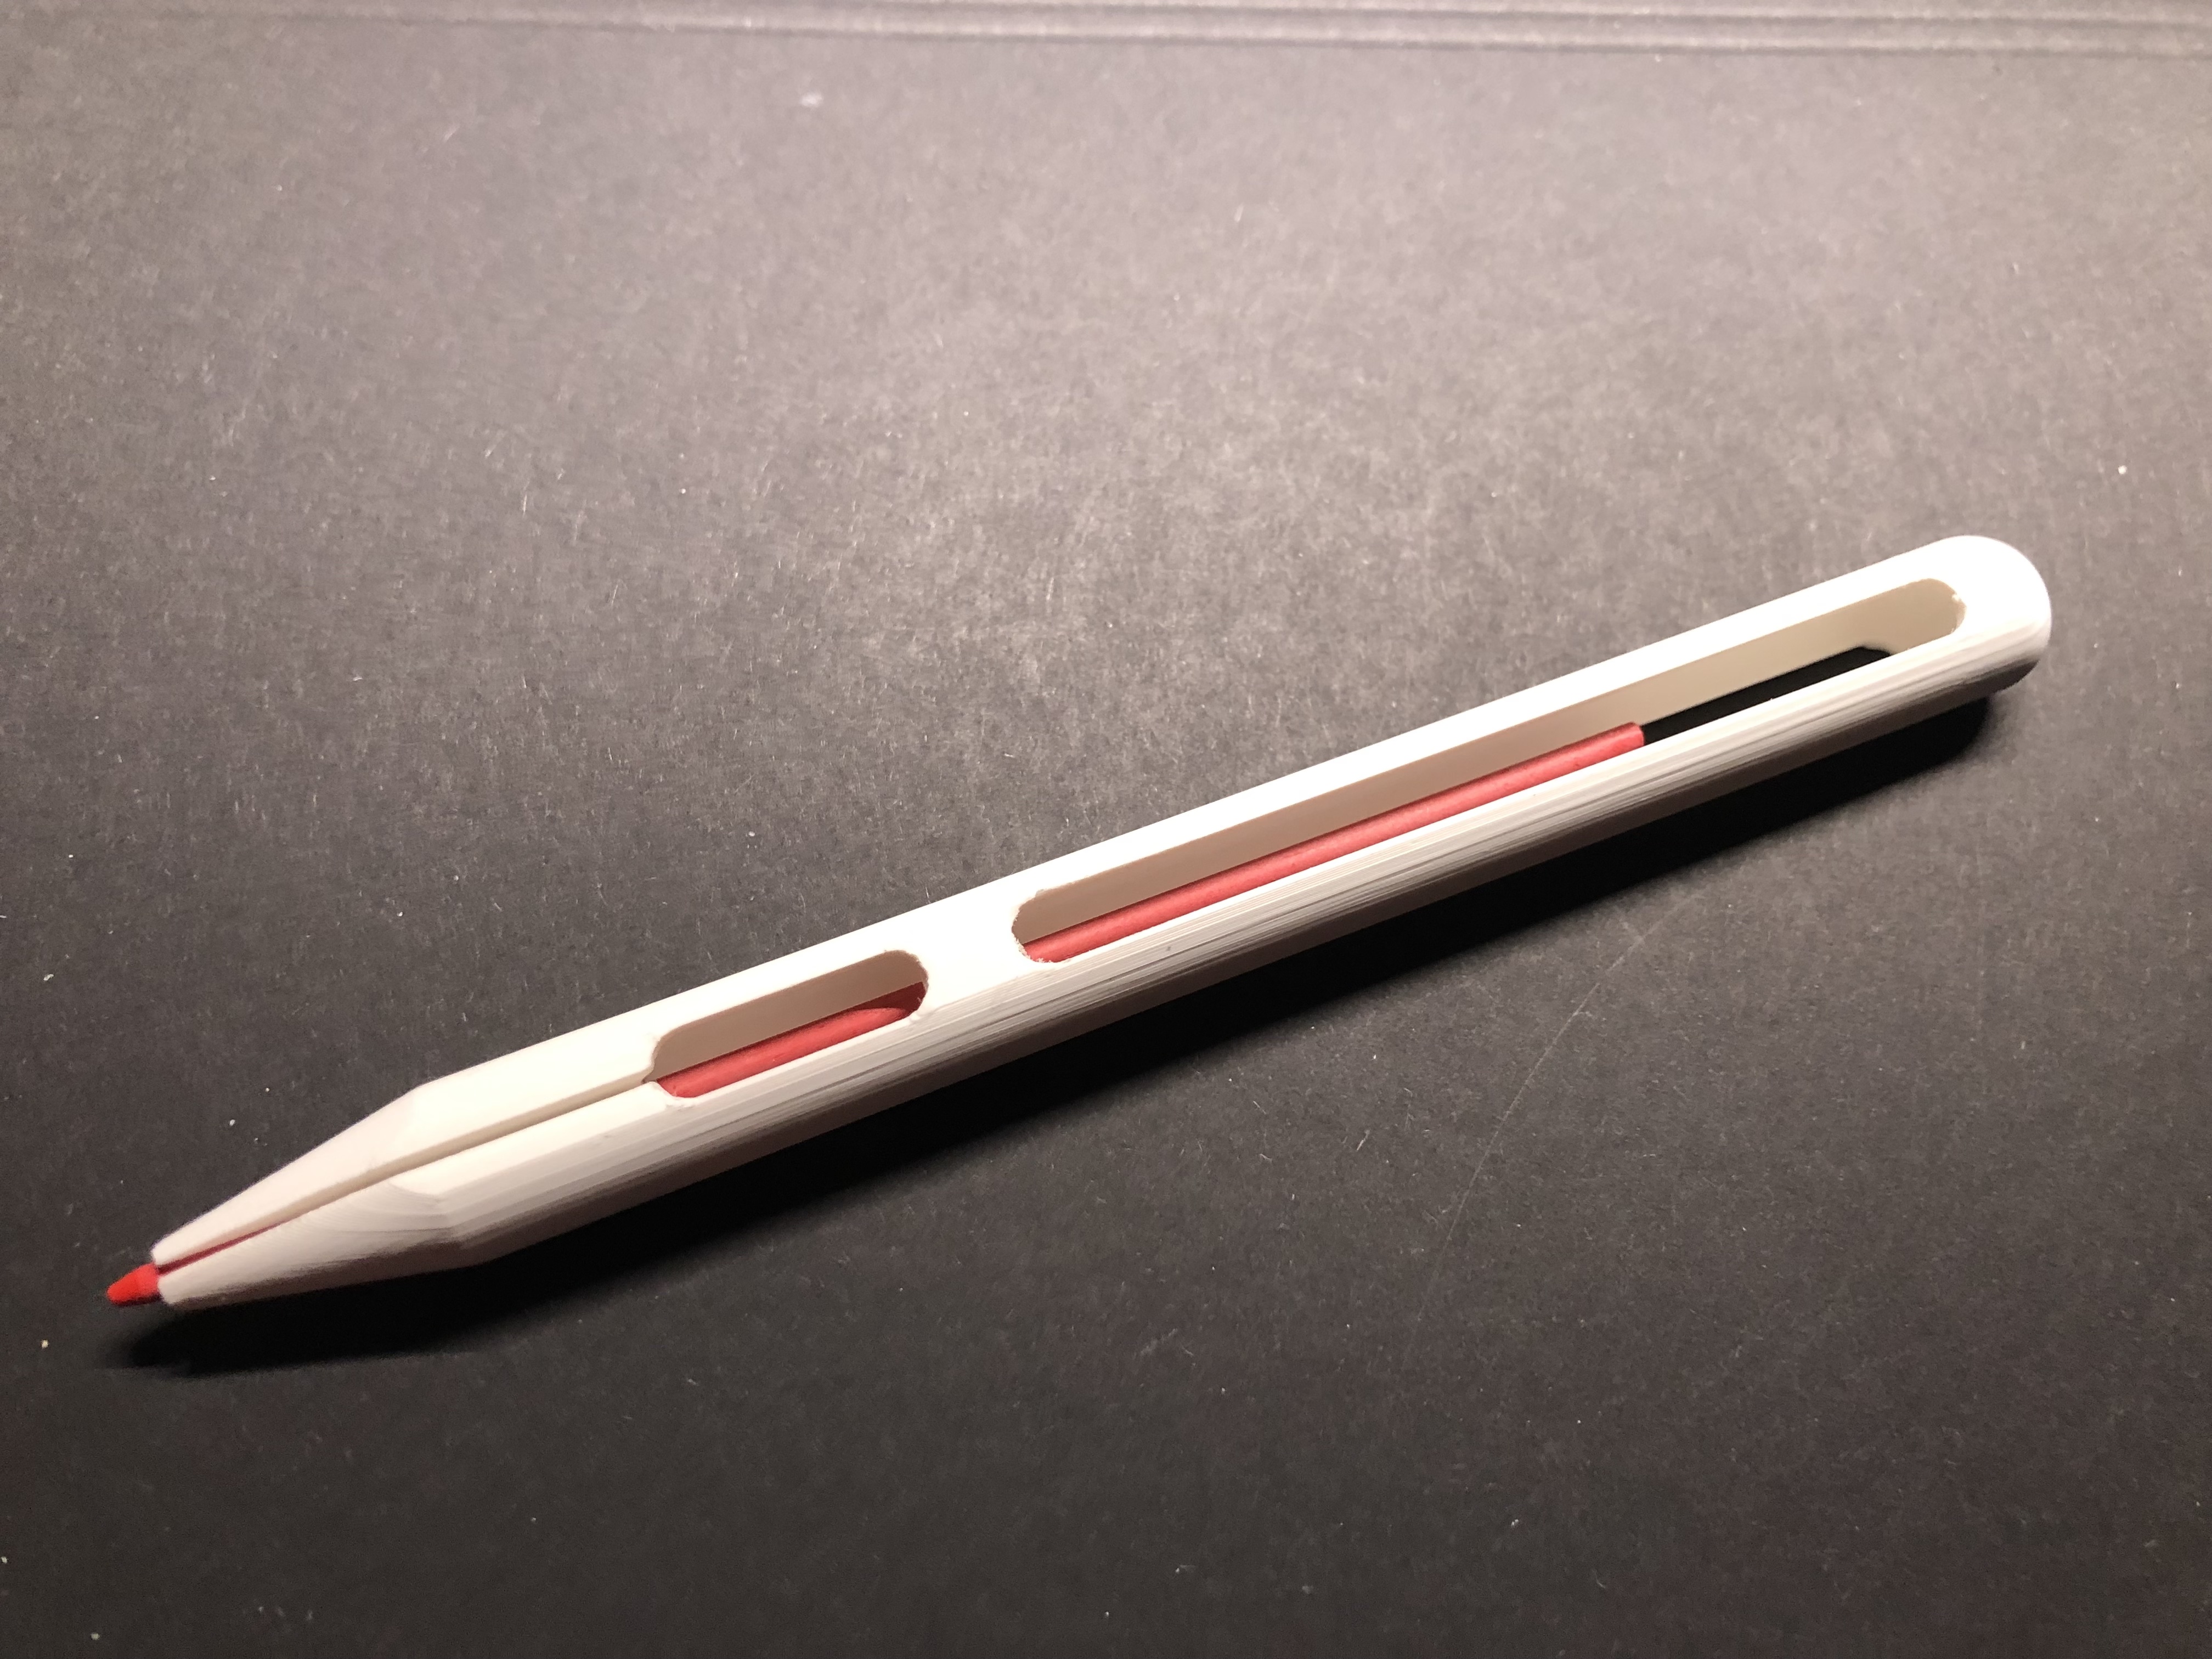 Flexible Pen with a simple design - works with 2,8mm Pica leads by